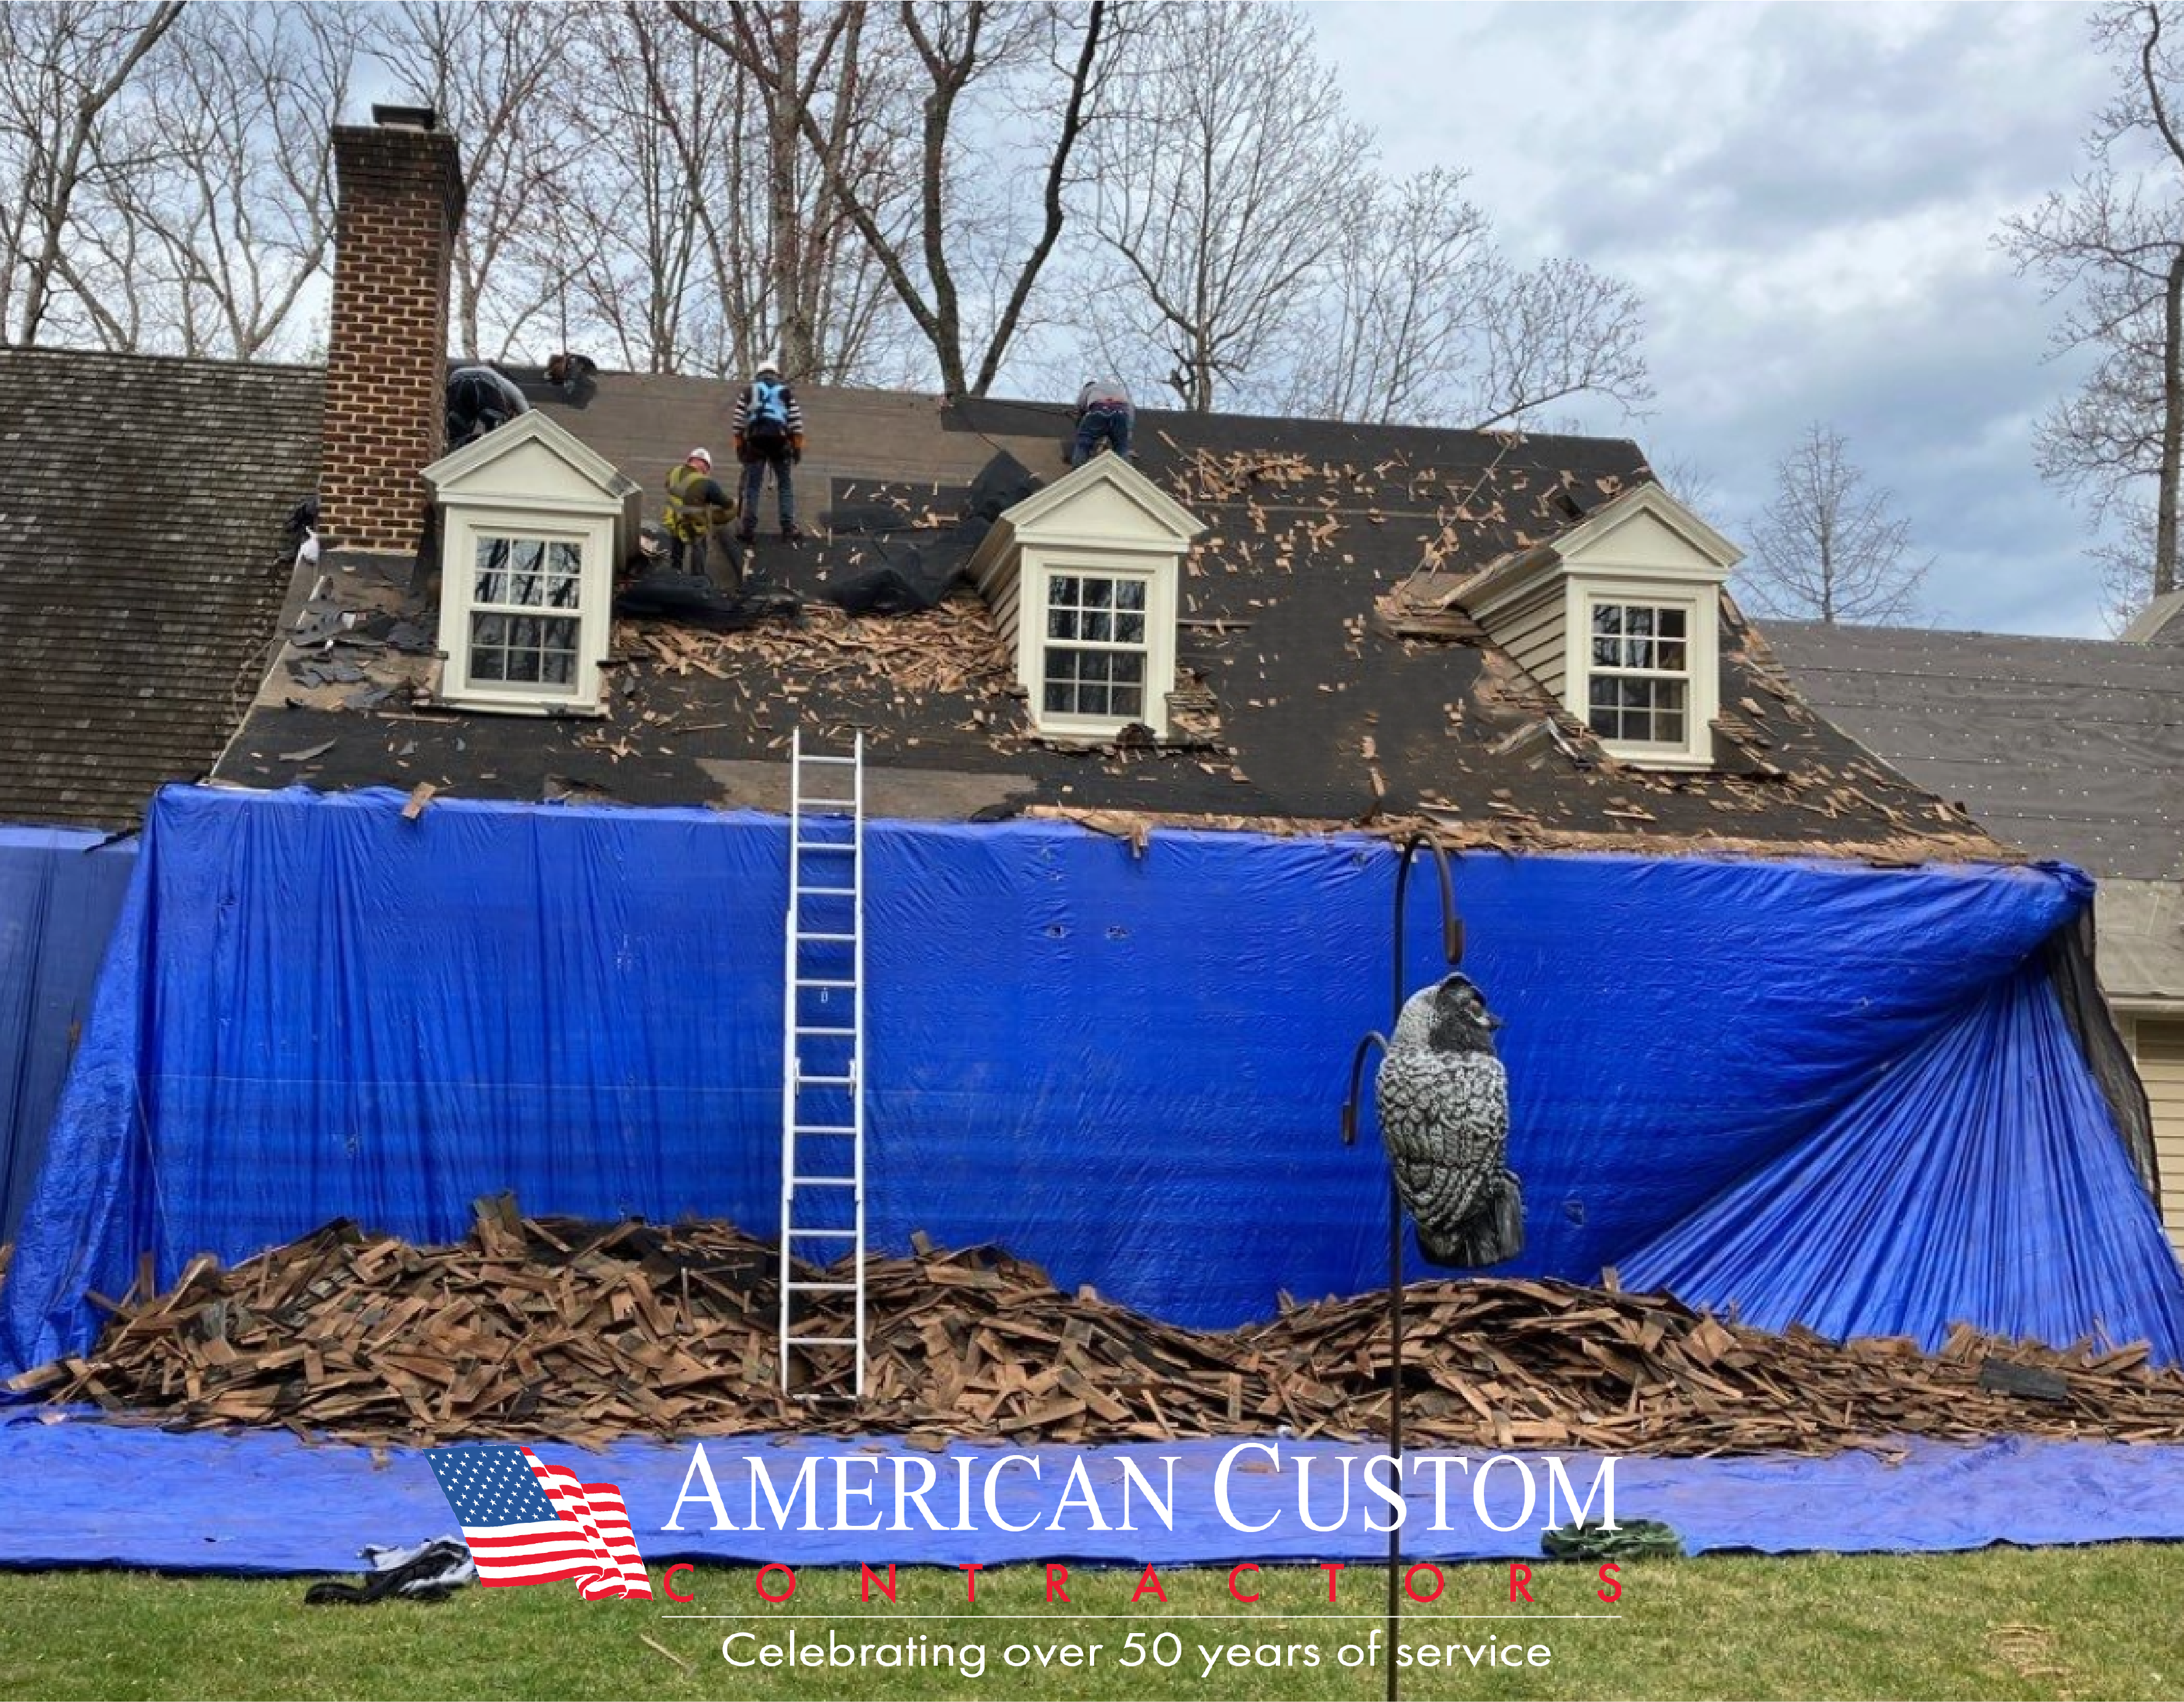 Picture of a home that is having it's old roof shingles removed in preparation for a roof install. Big blue tarp protecting the front of the home